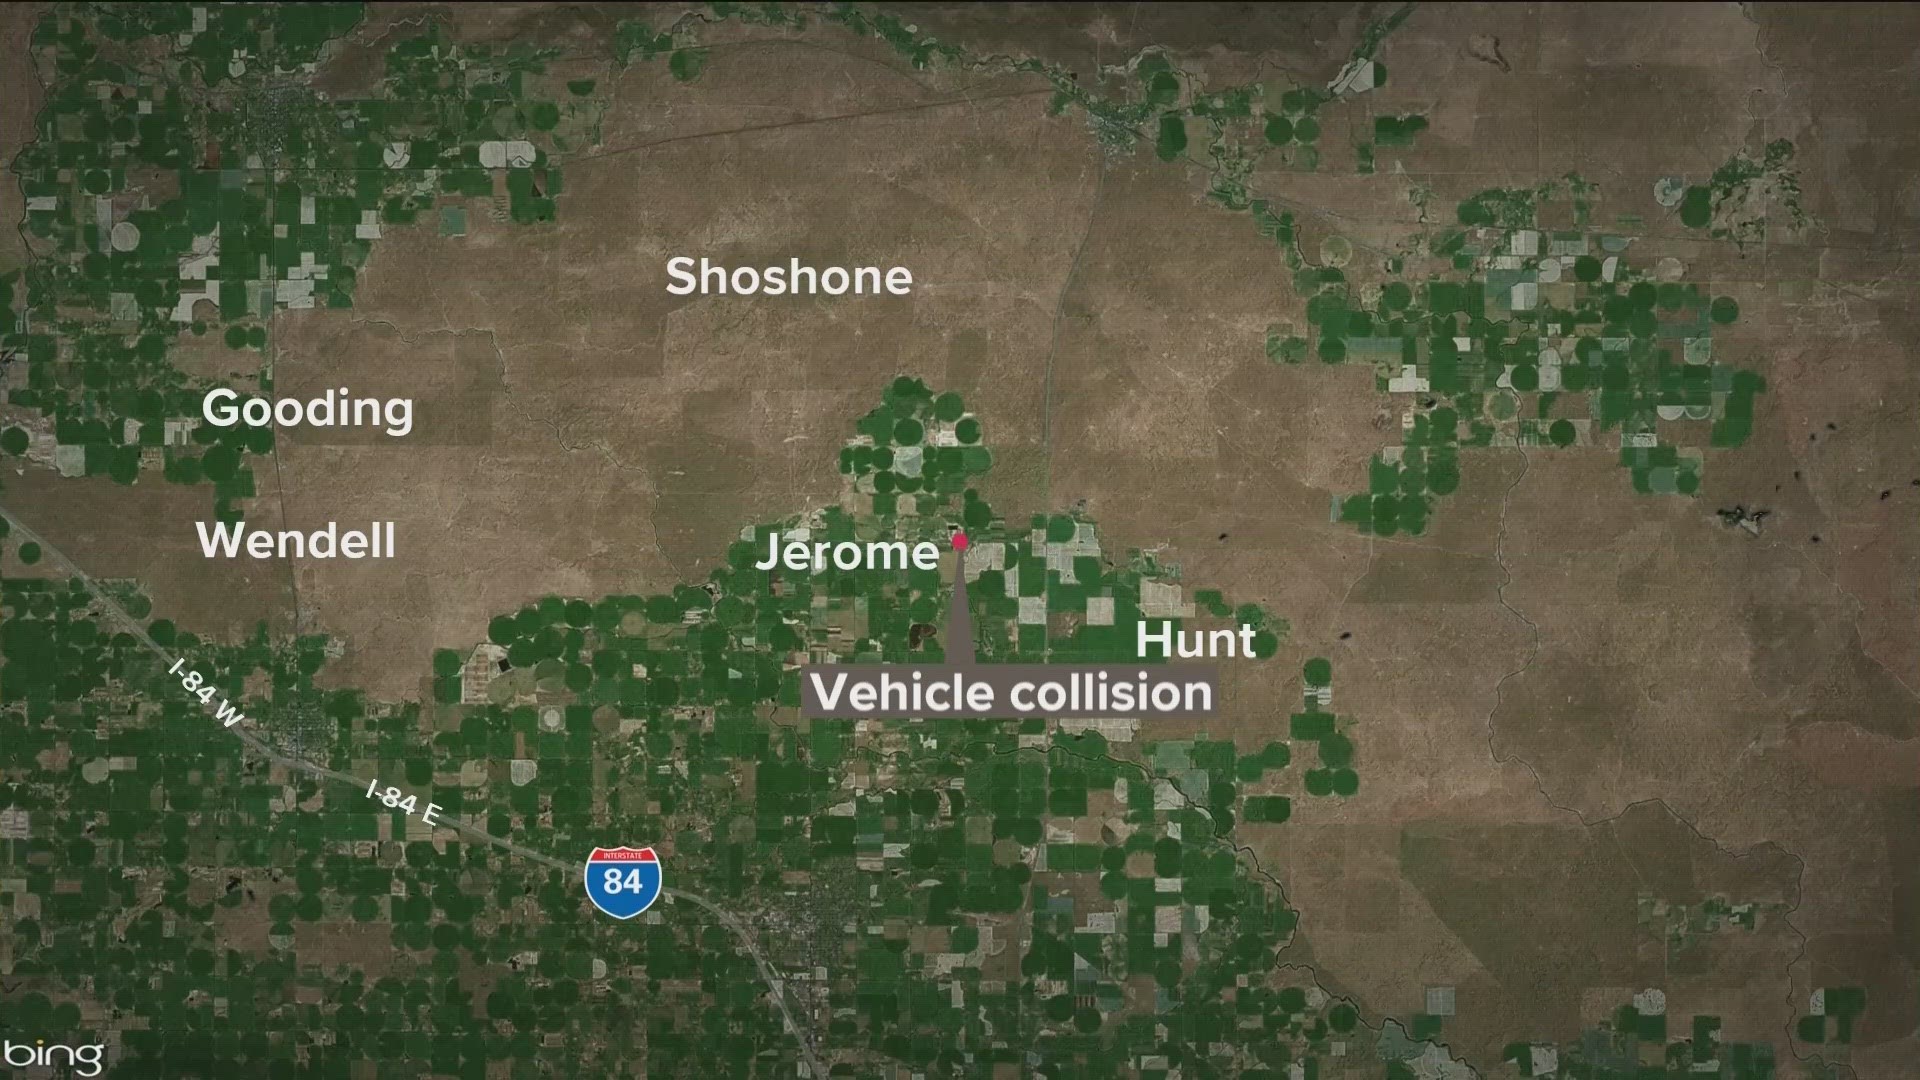 A man died in Jerome after his car crossed into the opposite lane and collided with another vehicle.